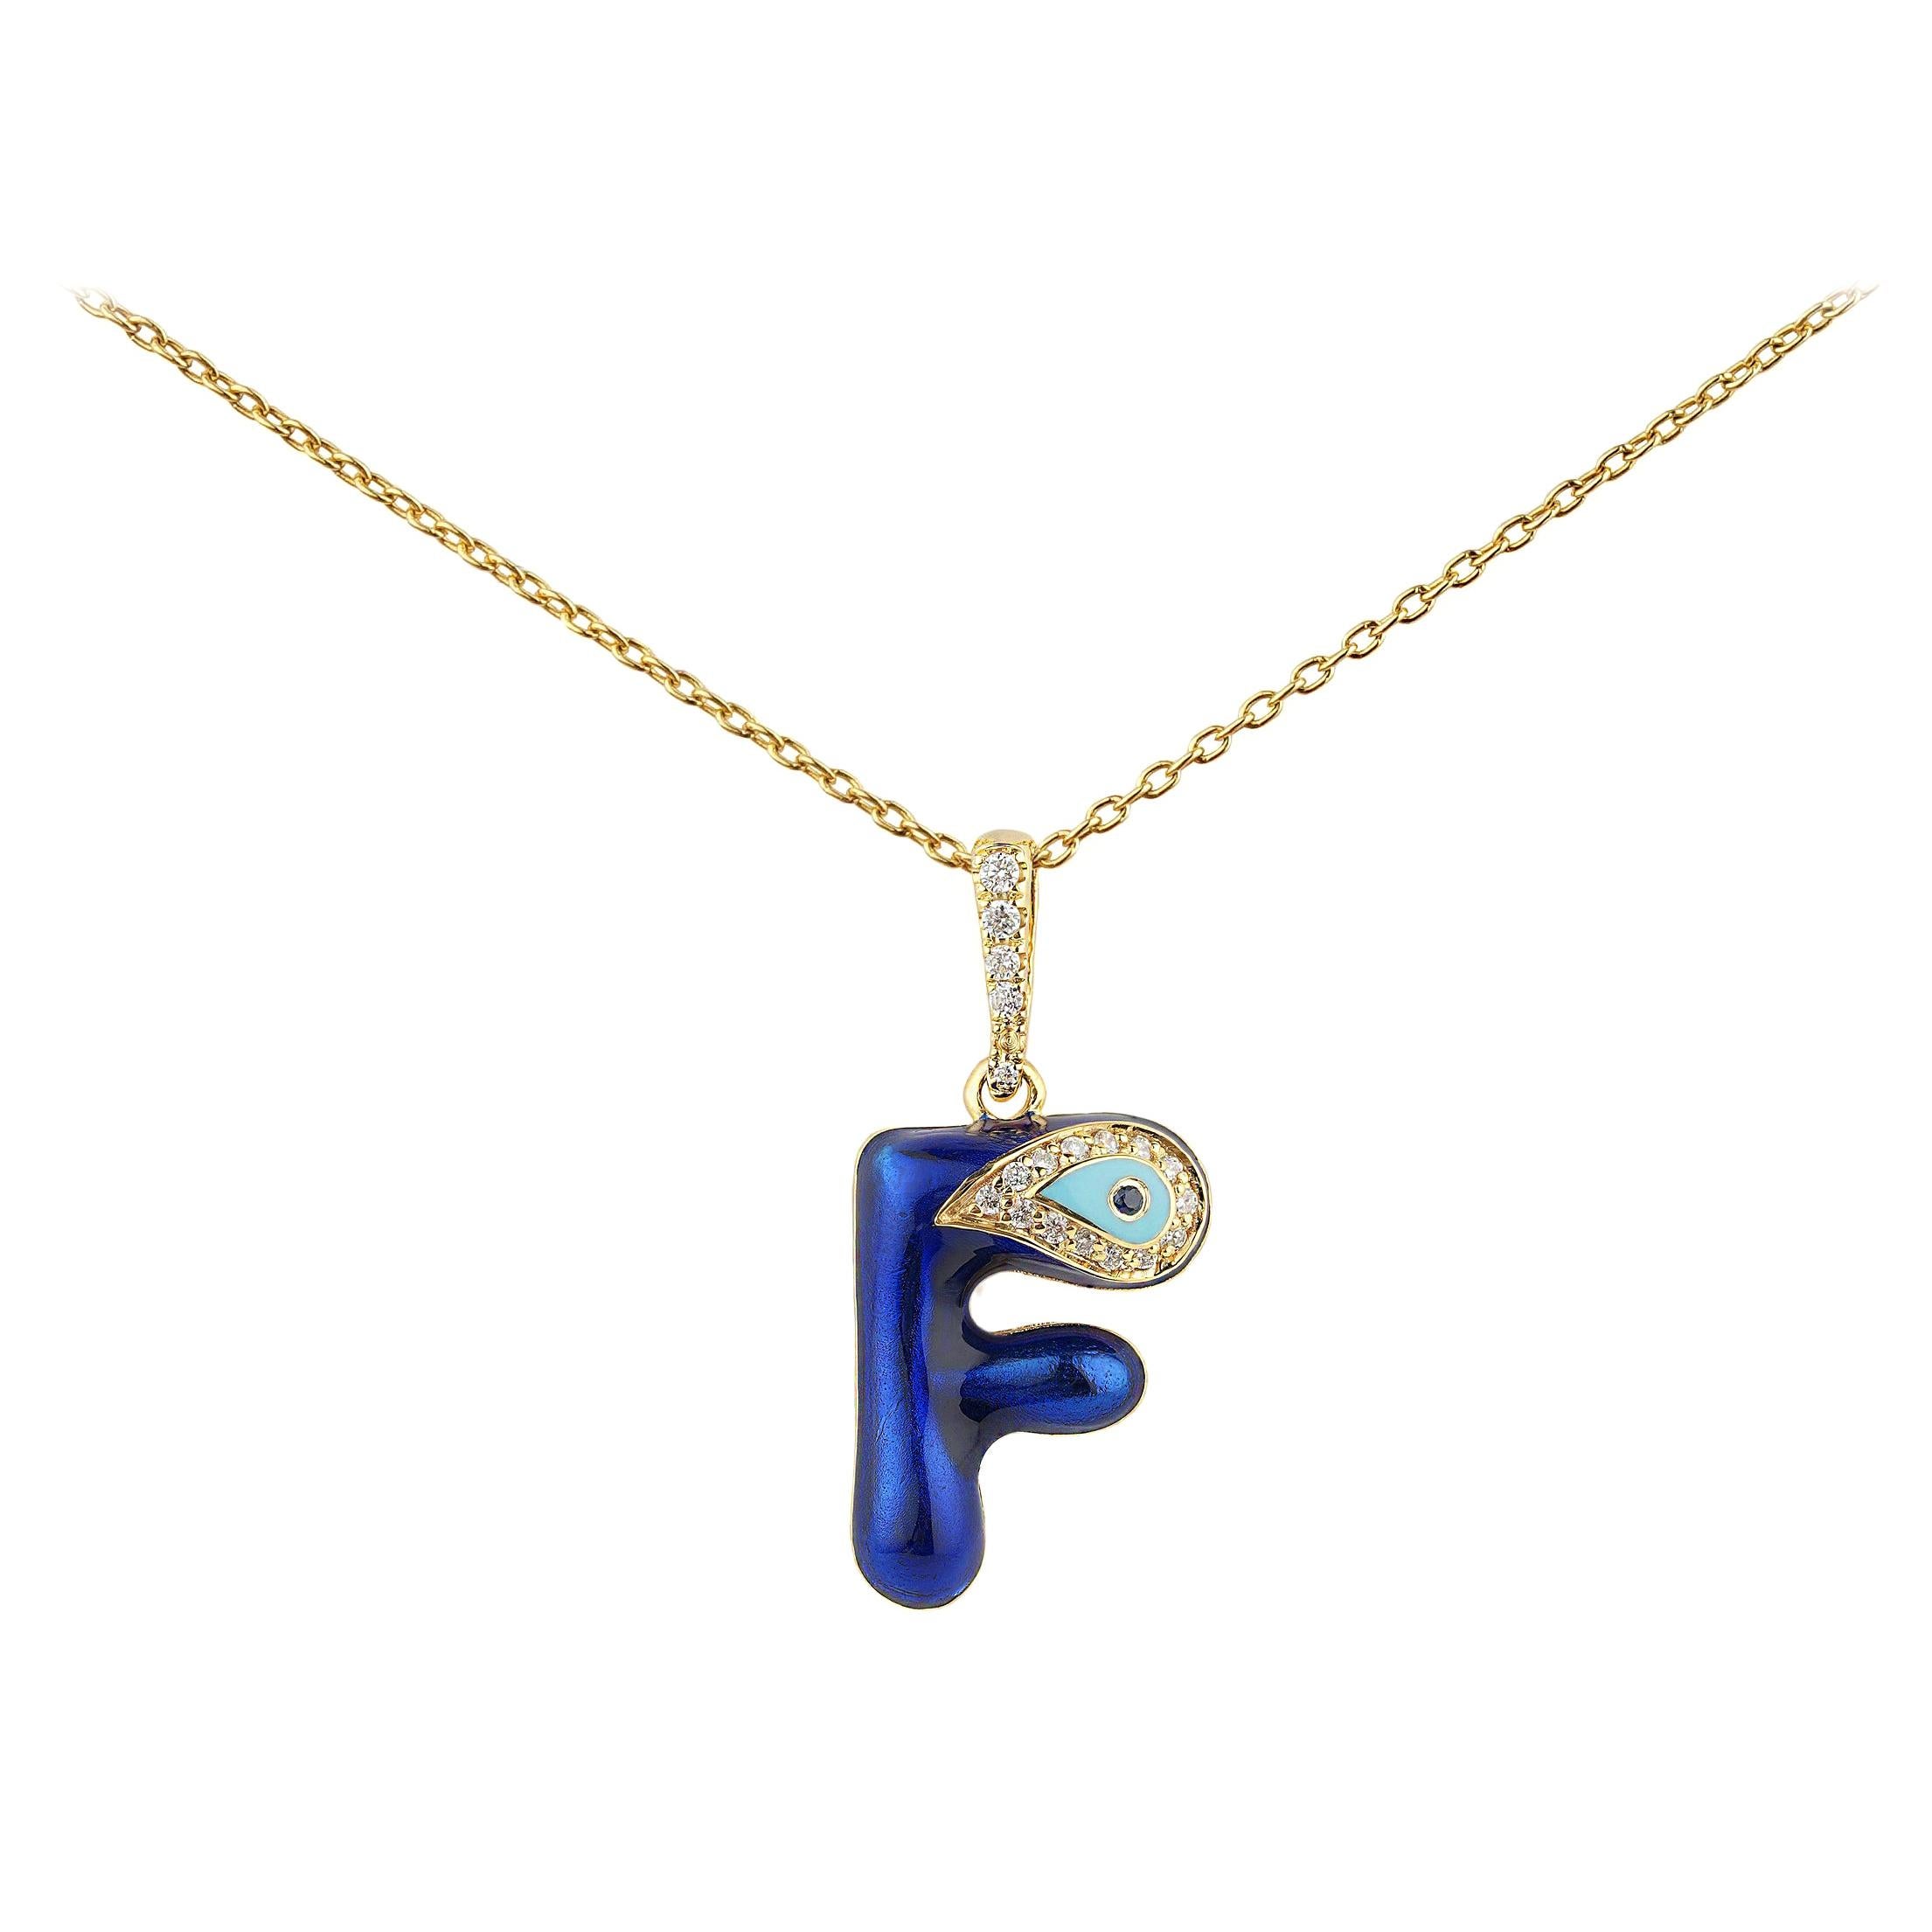 Christmas Gift to Someone You Love.
Fine Jewelry For Every Day, The Nazarlique Handcrafting Enamel Evil Eye ID Letter Form F Charm Diamond Necklace In 14K Solid Yellow Gold Is A Striking Example Of The Sentimental Style. 
The Nazarlique initials are